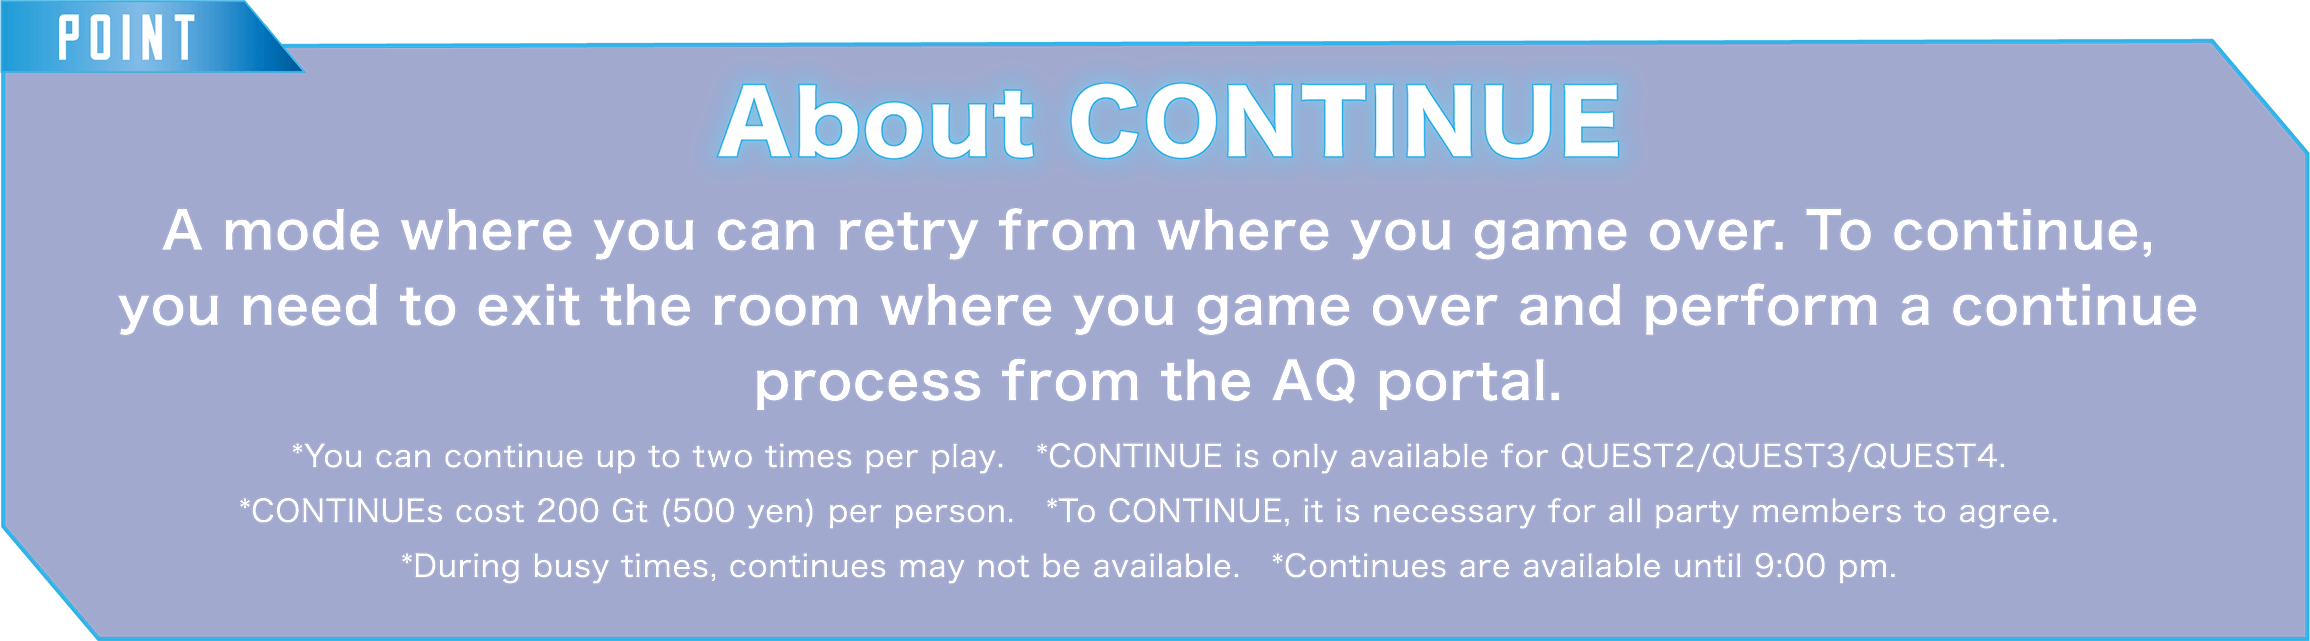 POINT About CONTINUE A mode where you can retry from where you game over. To continue, you need to exit the room where you game over and perform a continue process from the AQ portal.*You can continue up to two times per play.　*CONTINUE is only available for QUEST2/QUEST3/QUEST4. *CONTINUEs cost 200 Gt (500 yen) per person.　*To CONTINUE, it is necessary for all party members to agree. *During busy times, continues may not be available.　*Continues are available until 9:00 pm.